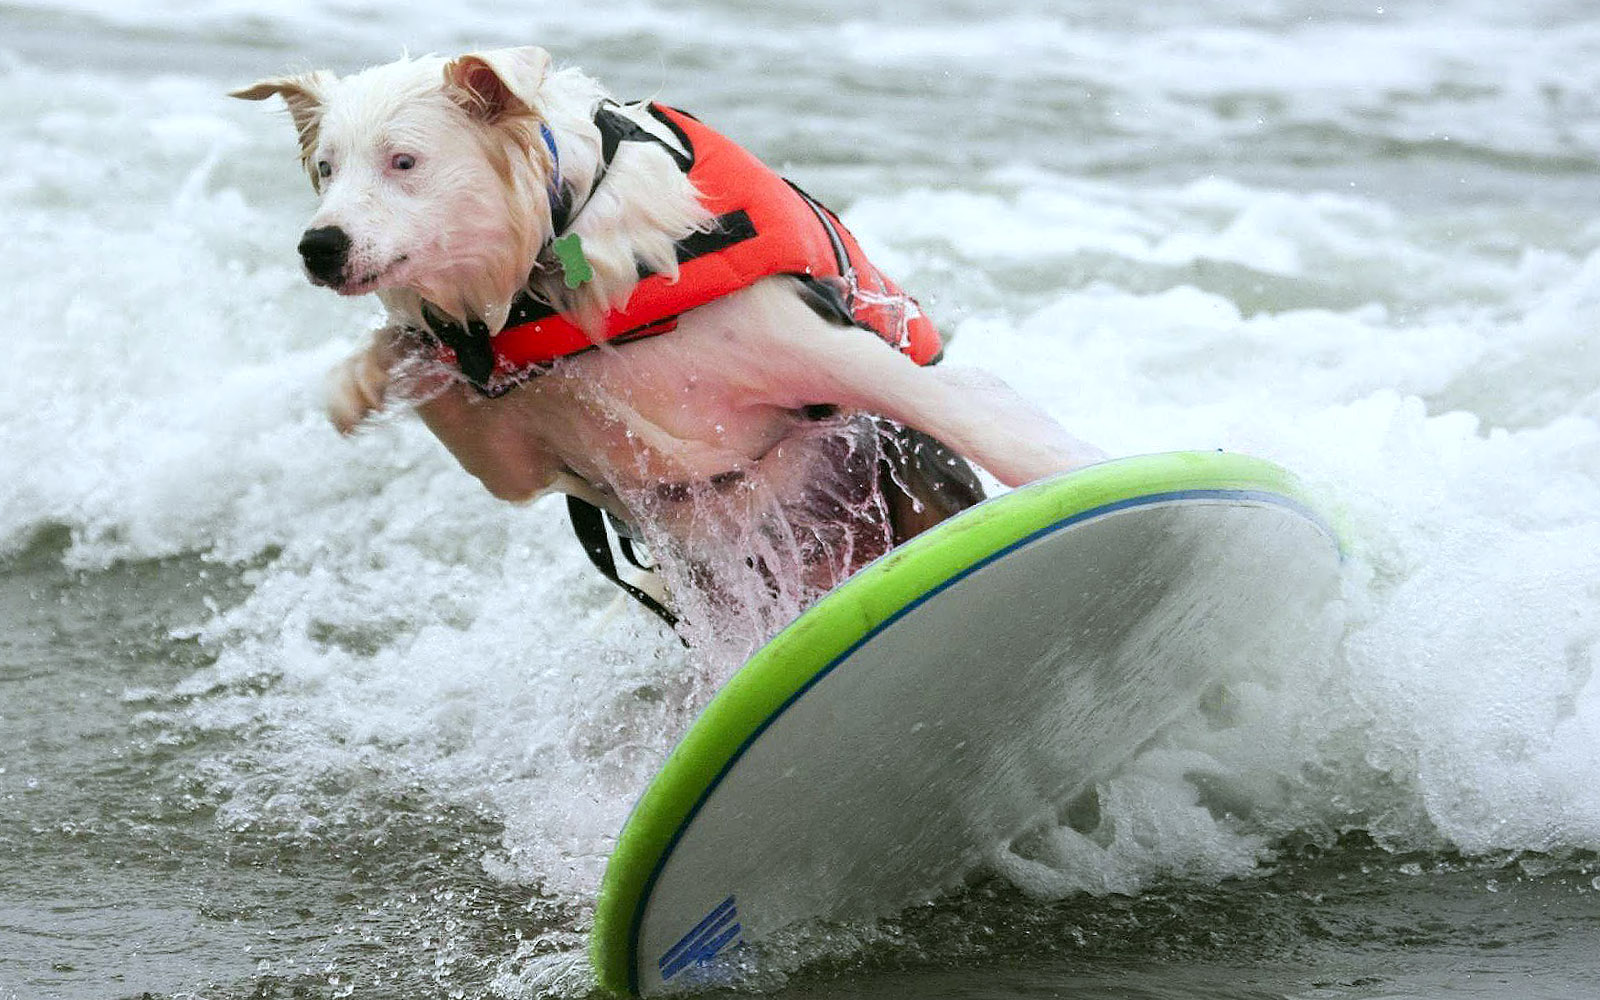 White Dog Surfing Picture Wallpaper